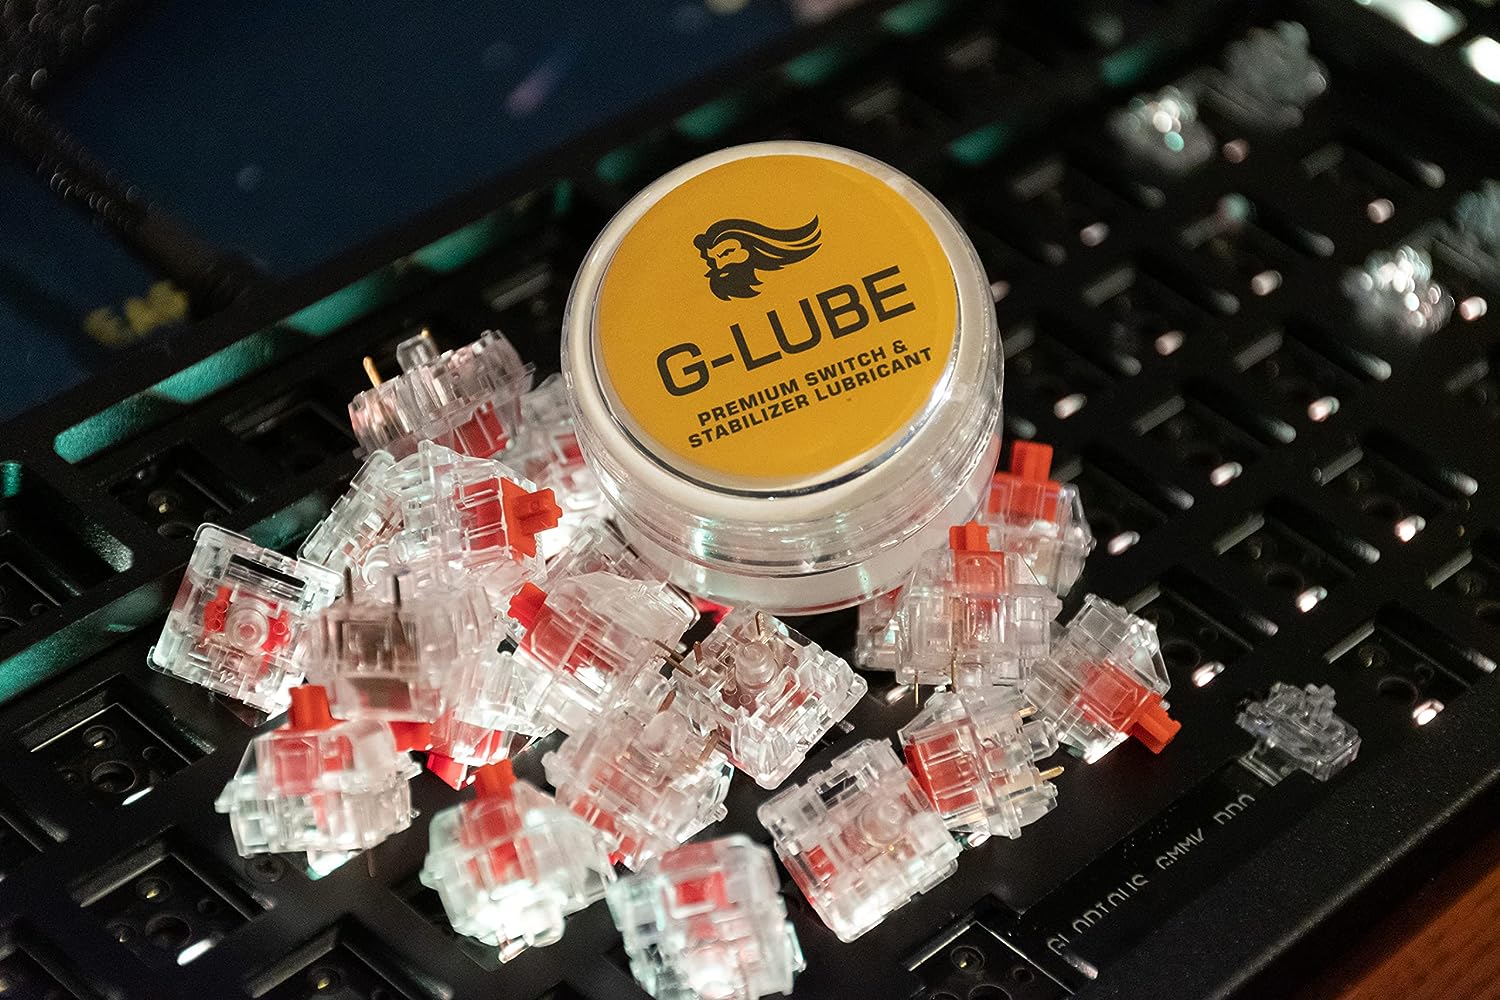 A large marketing image providing additional information about the product Glorious Keyboard G-Lube - Additional alt info not provided